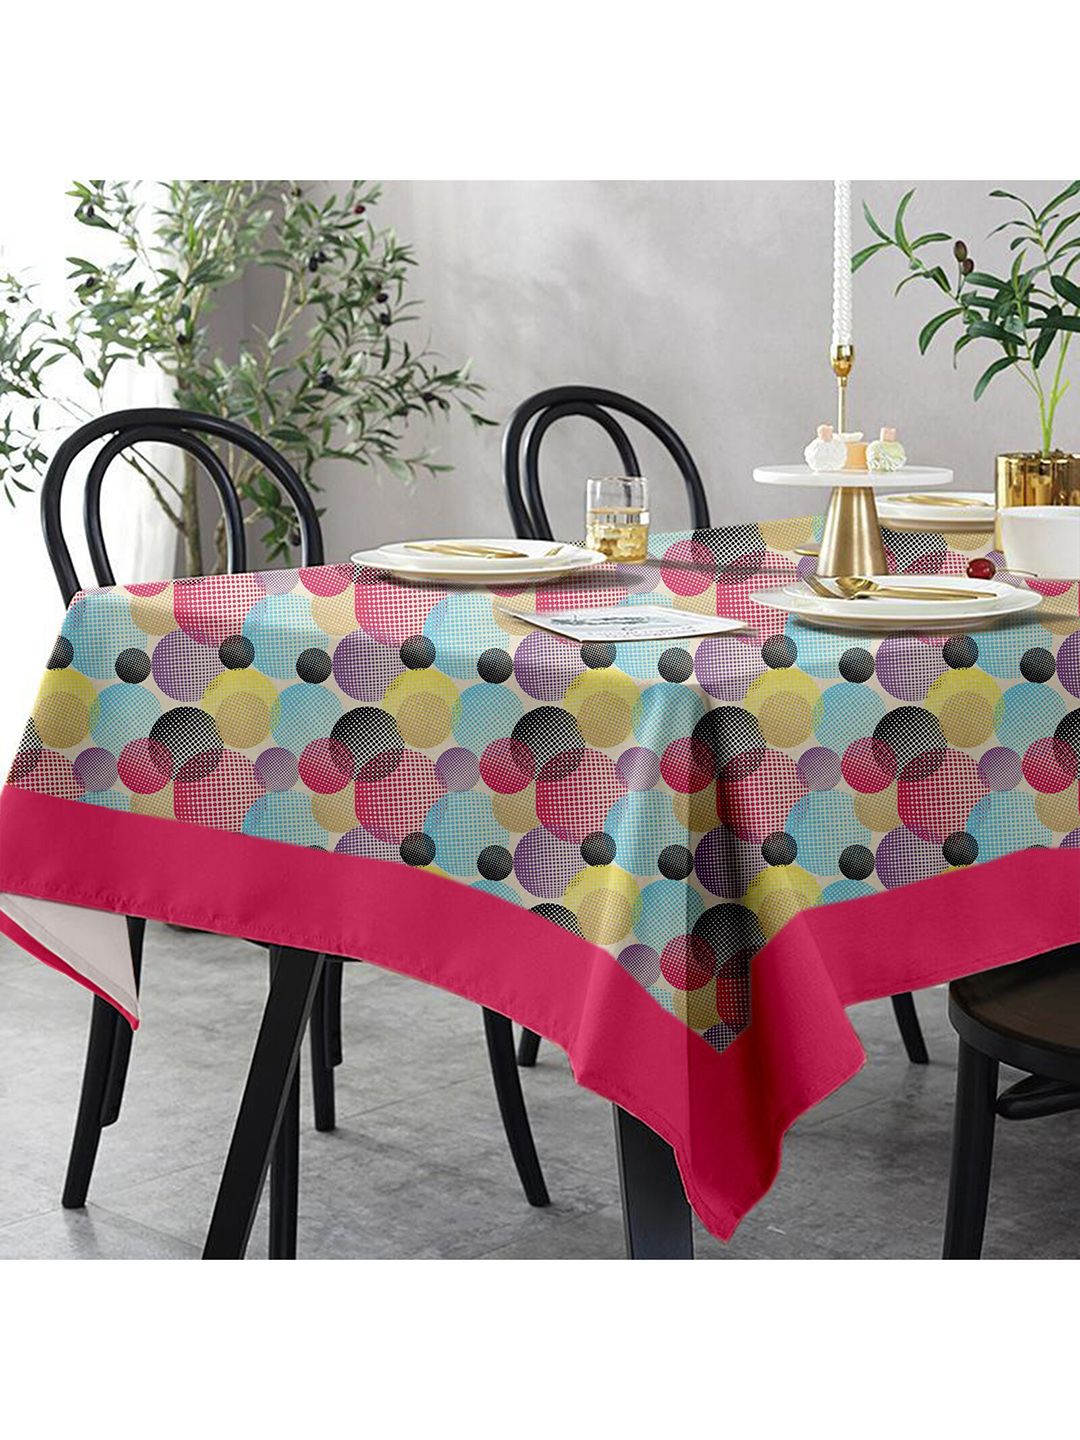 Lushomes Multicolored 12 Seater Printed Cotton Table Cloth Price in India